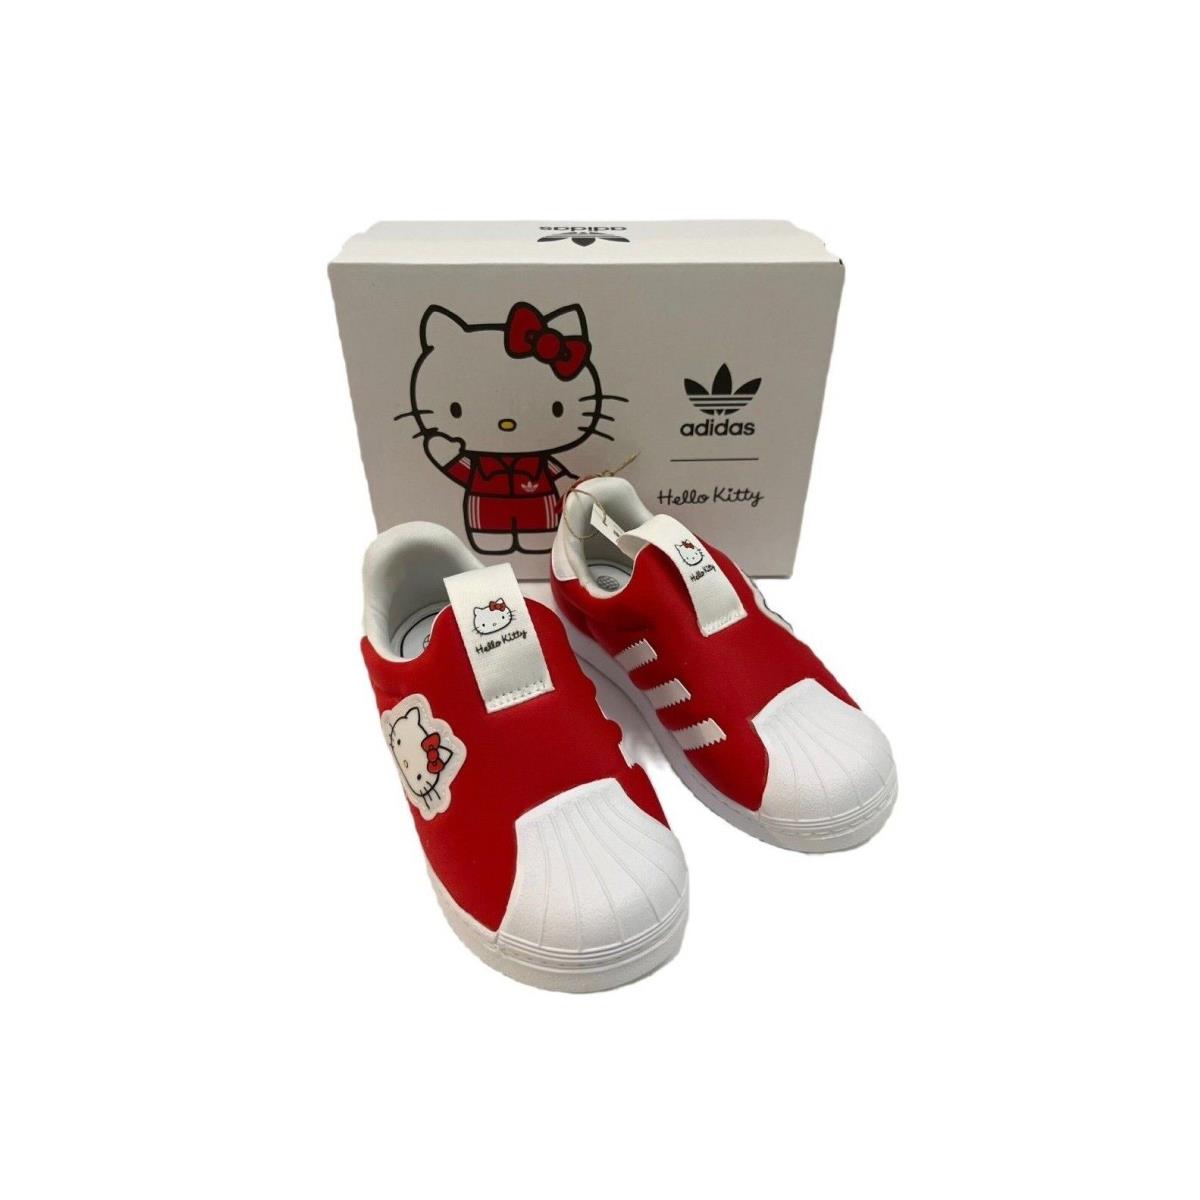 Adidas Hello Kitty Superstar 360 Shoes-toddler GY9213 - Vivid Red/Cloud White/Core Black